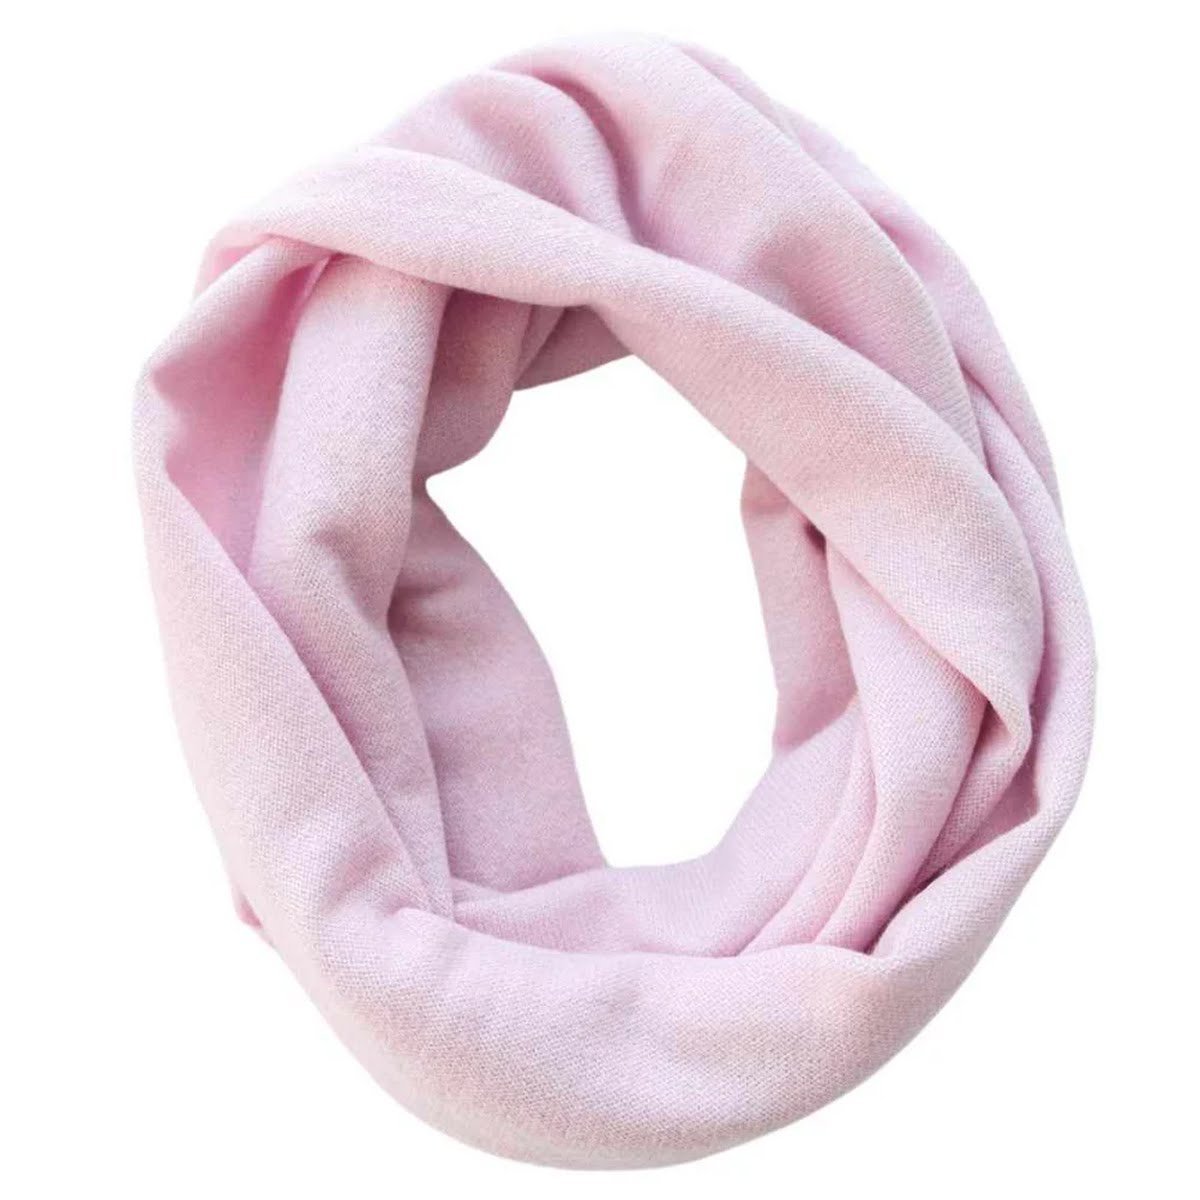 Wear With Cashmere Infinity Scarf, €135